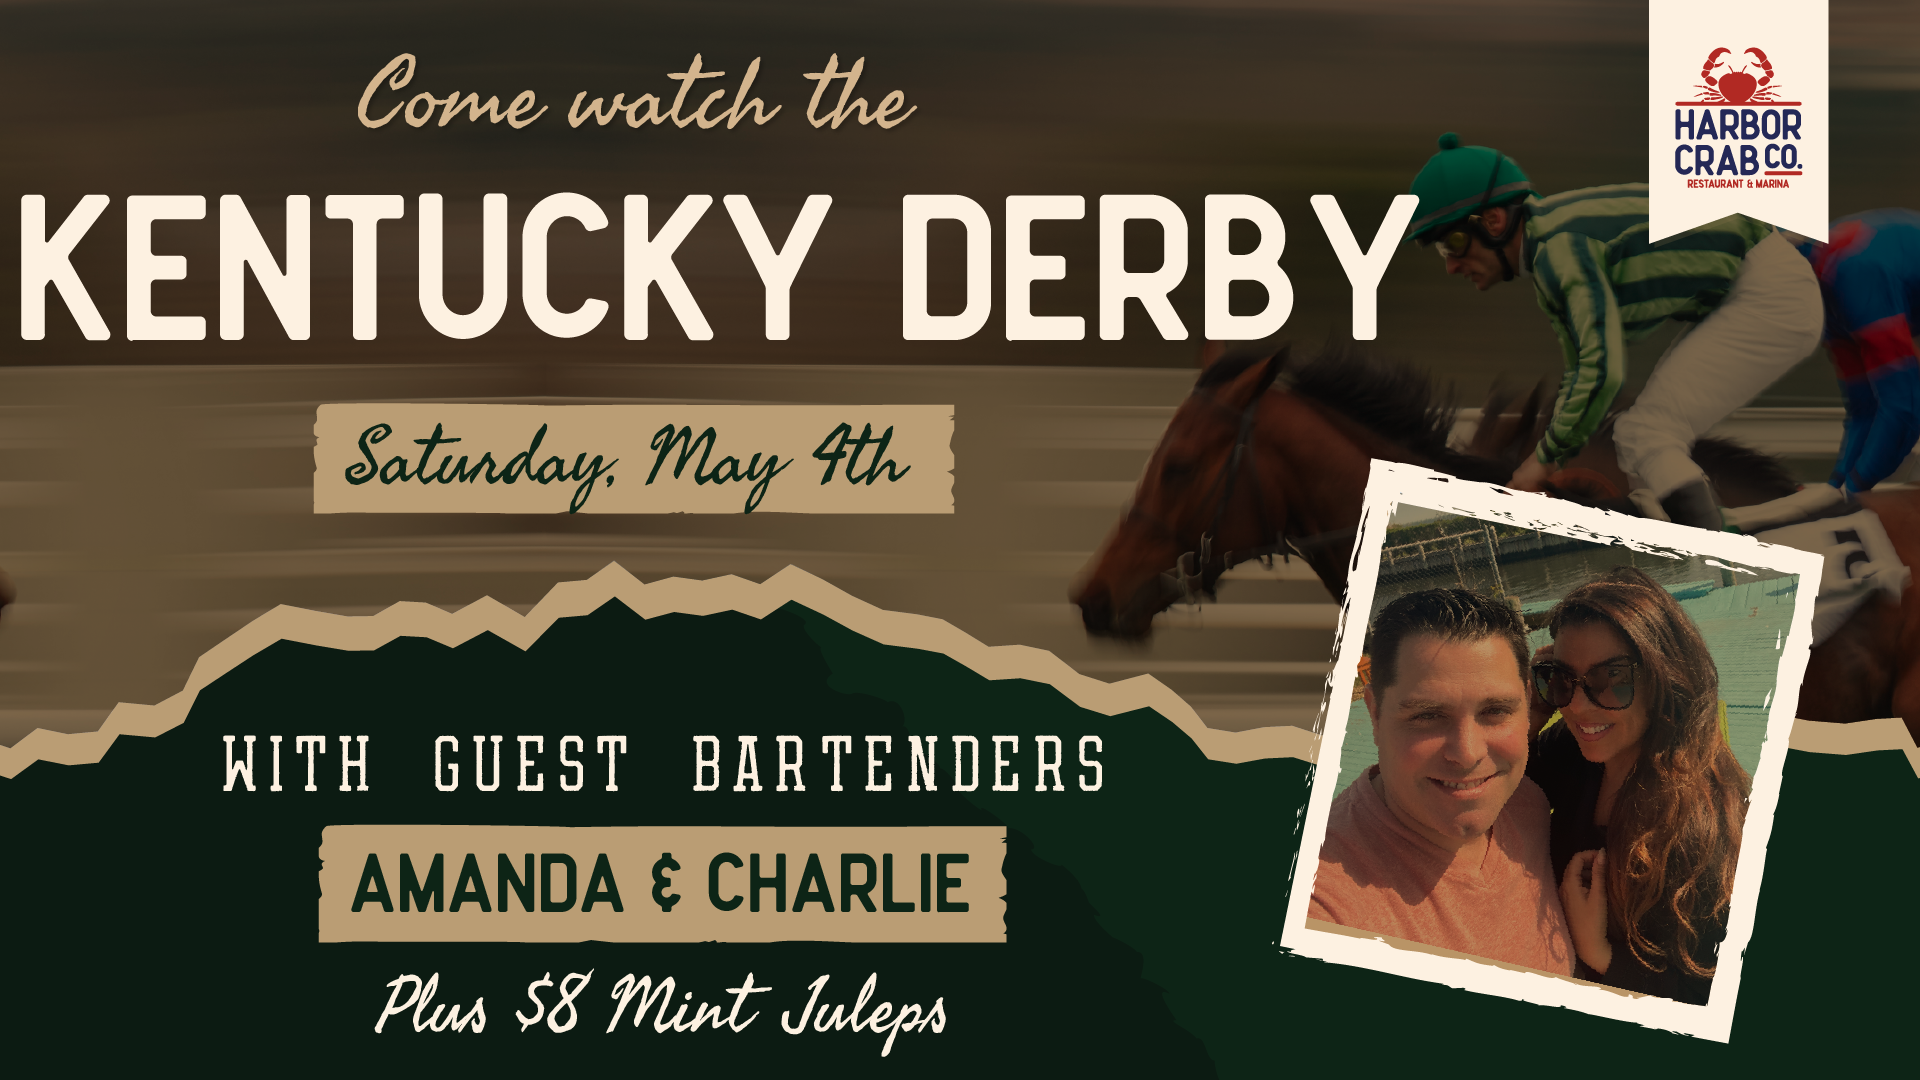 Kentucky Derby on May 4th at Harbor Crab with guest bartenders Amanda and Charlie, featuring $8 Mint Juleps